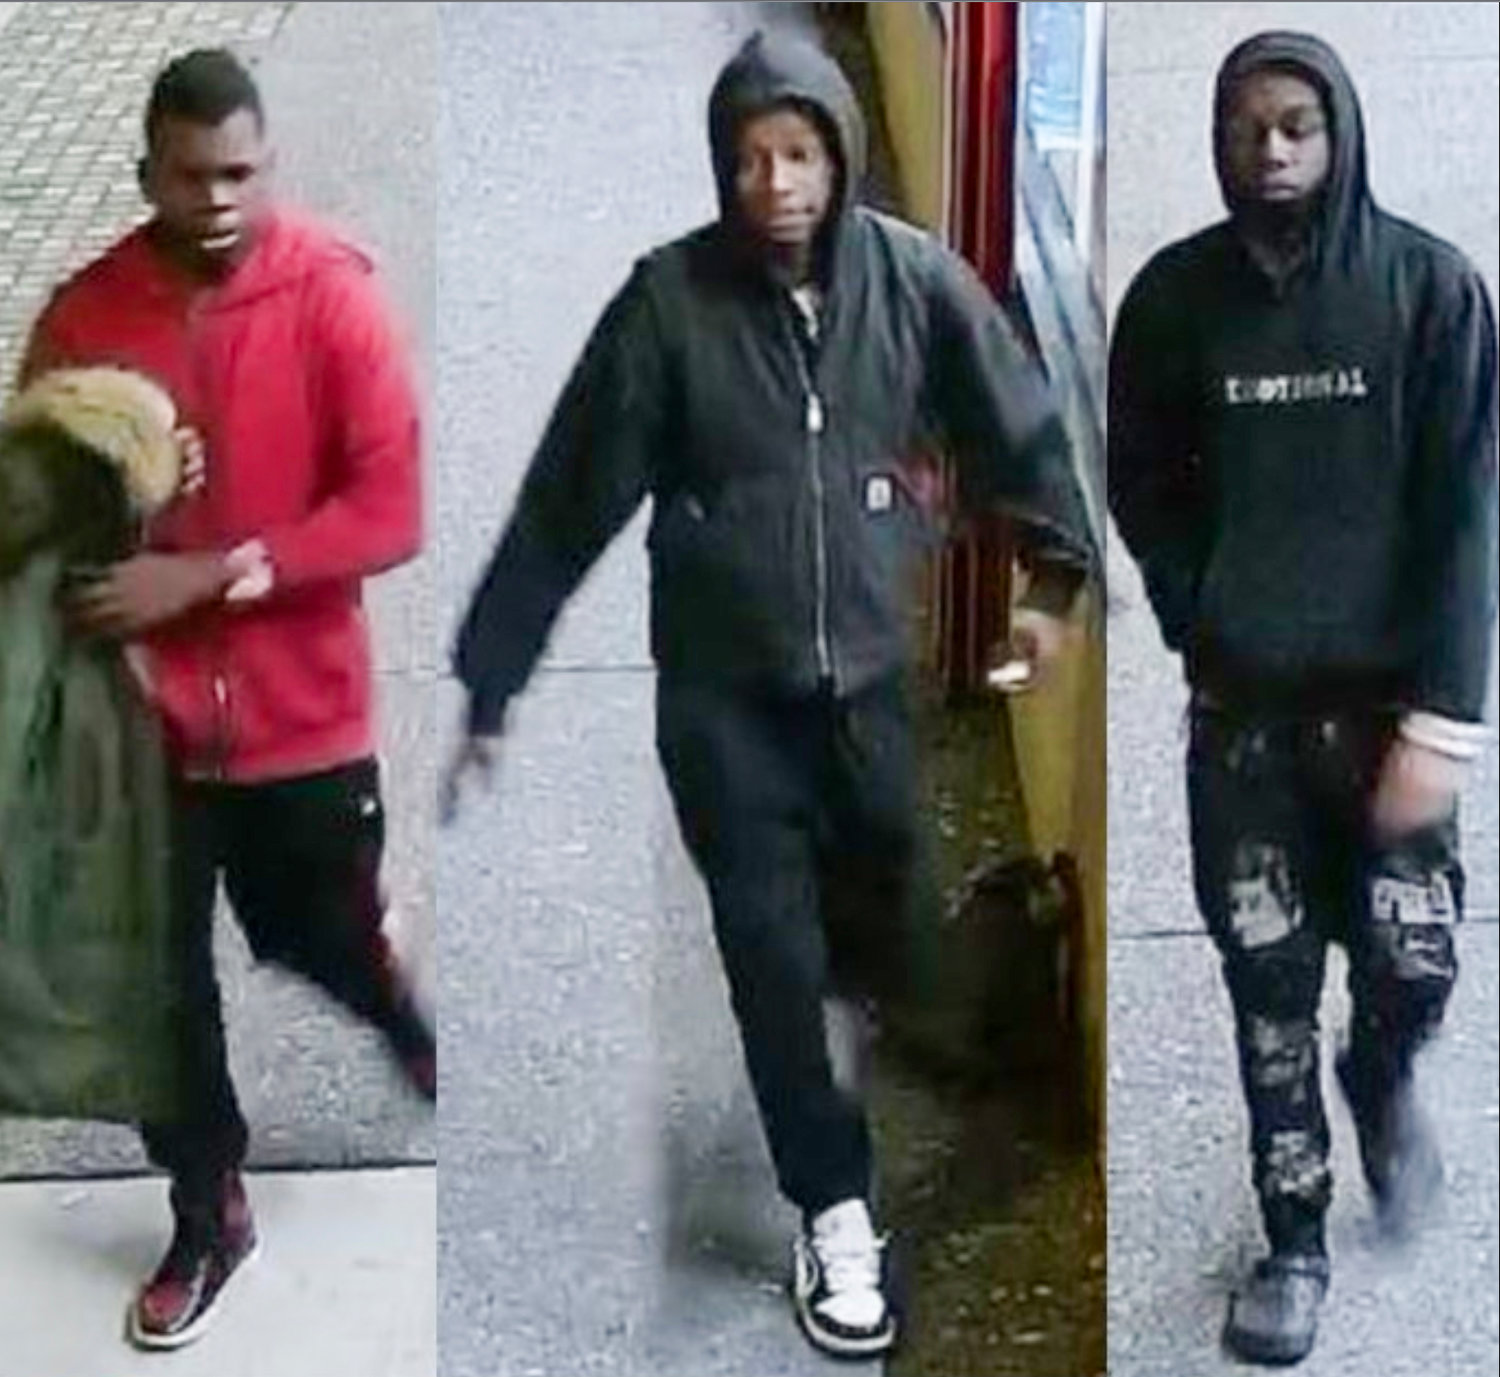 The 50th Precinct seeks the public’s help in identifying the three people in this photo who are alleged to have been involved in placing a metal object on a woman’s head and putting her on the ground before removing her coat and purse. Call (800) 577-TIPS with information. There is a reward of up to $3,500.